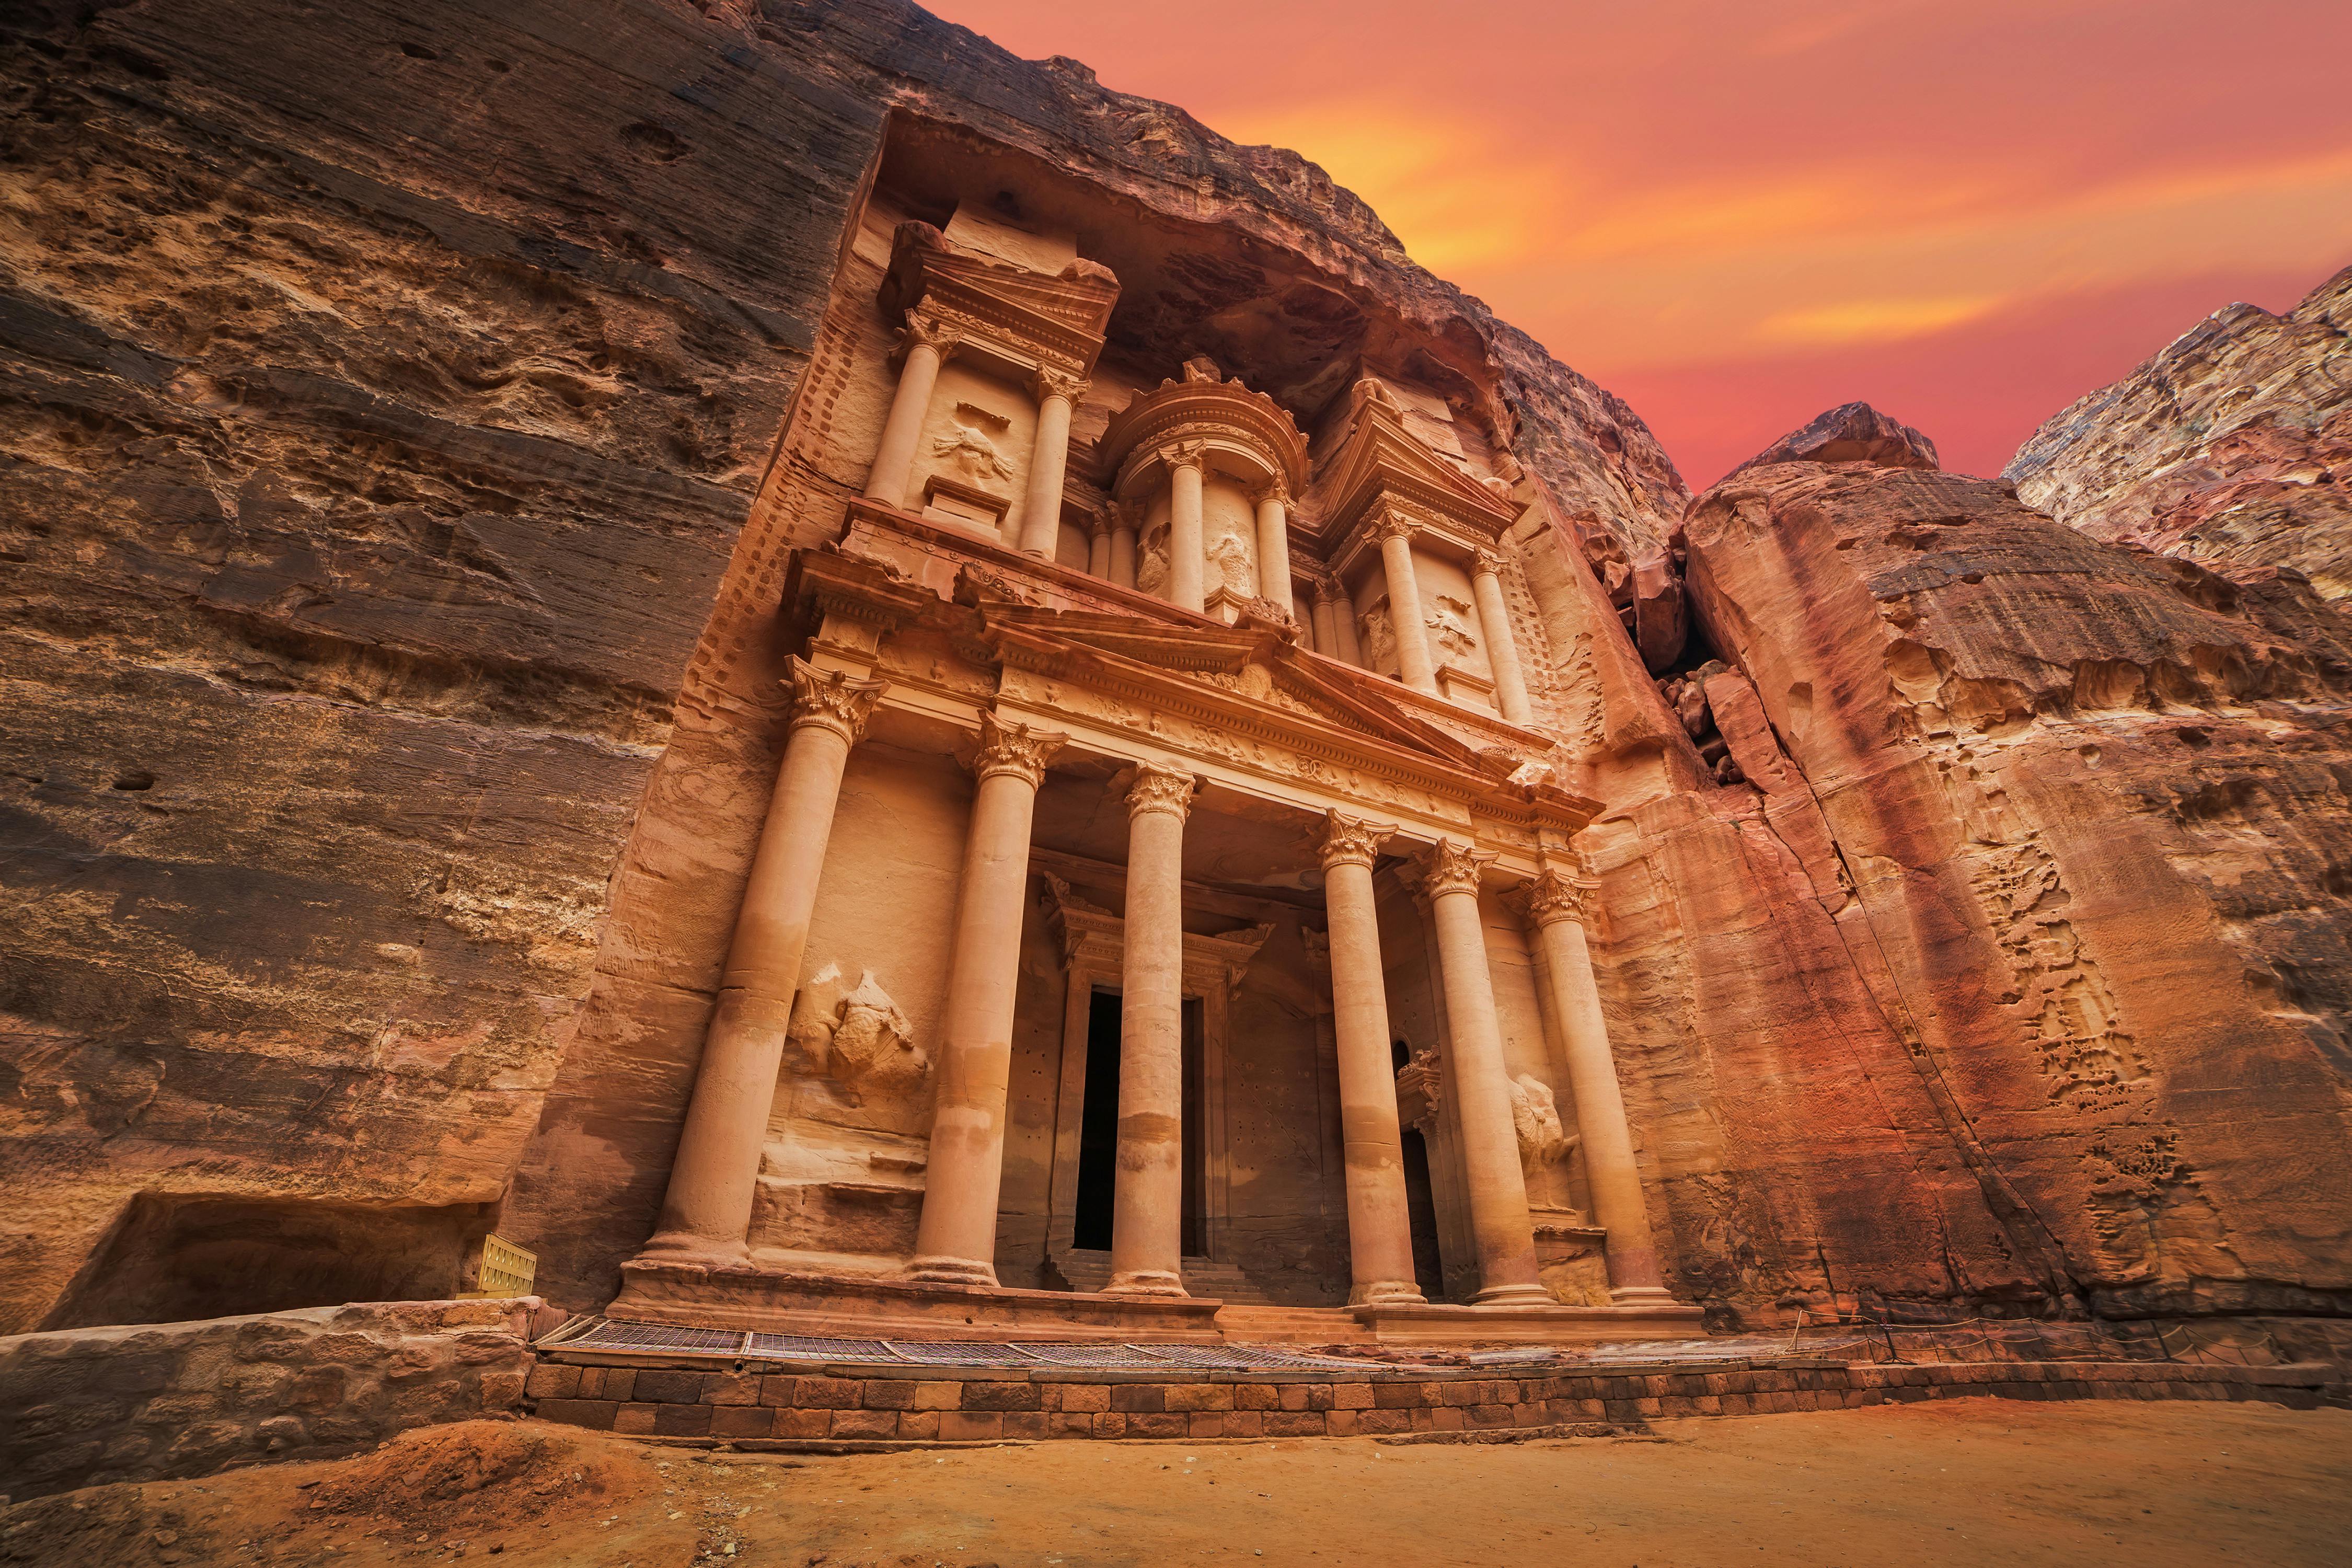 Private tour of Petra and the Monastery from Amman